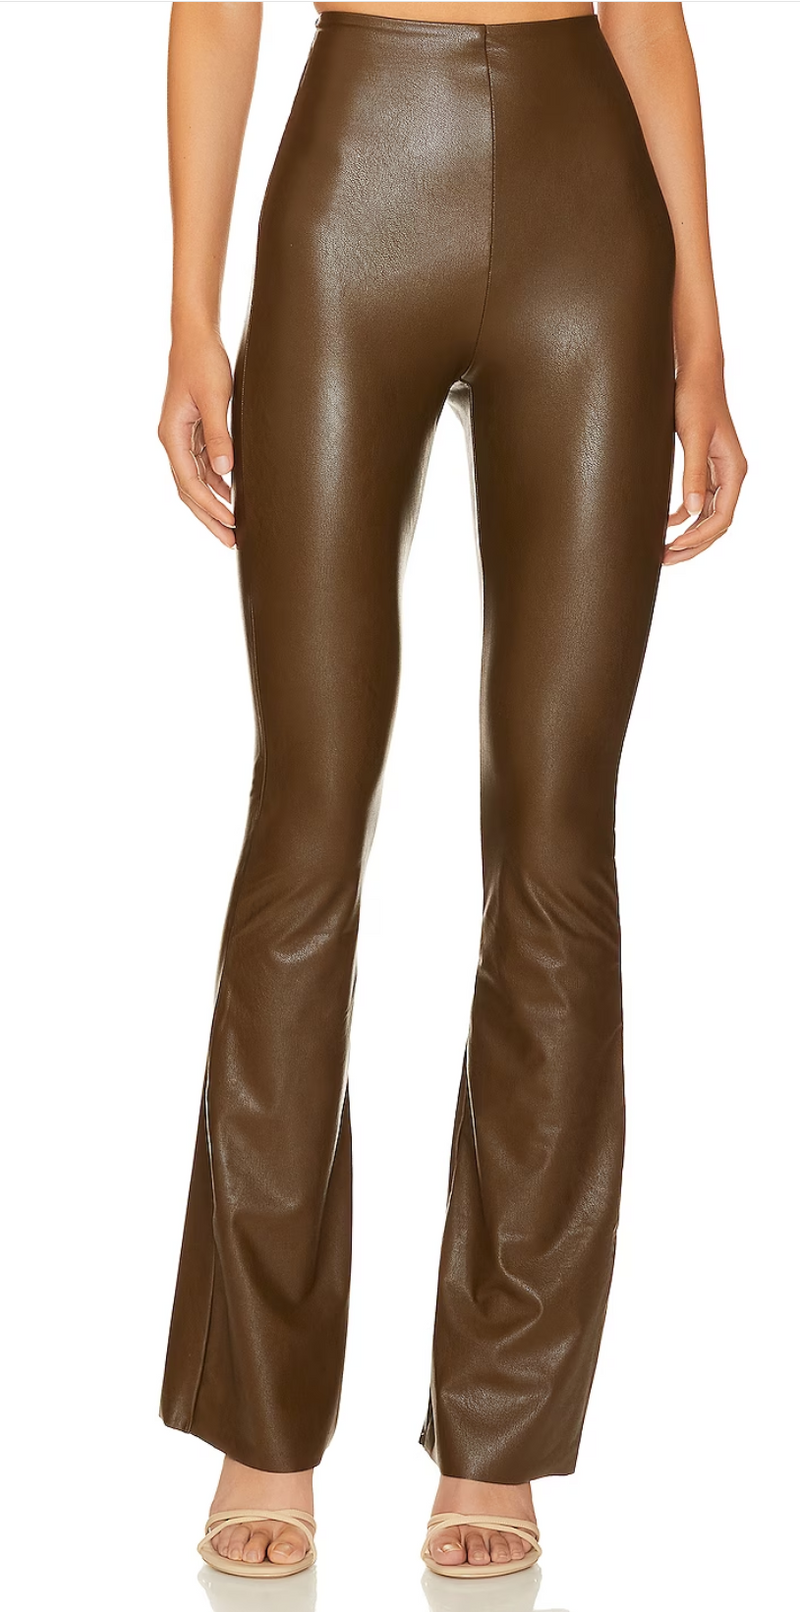 Commando Faux Leather High Waisted Flare Legging in Cadet